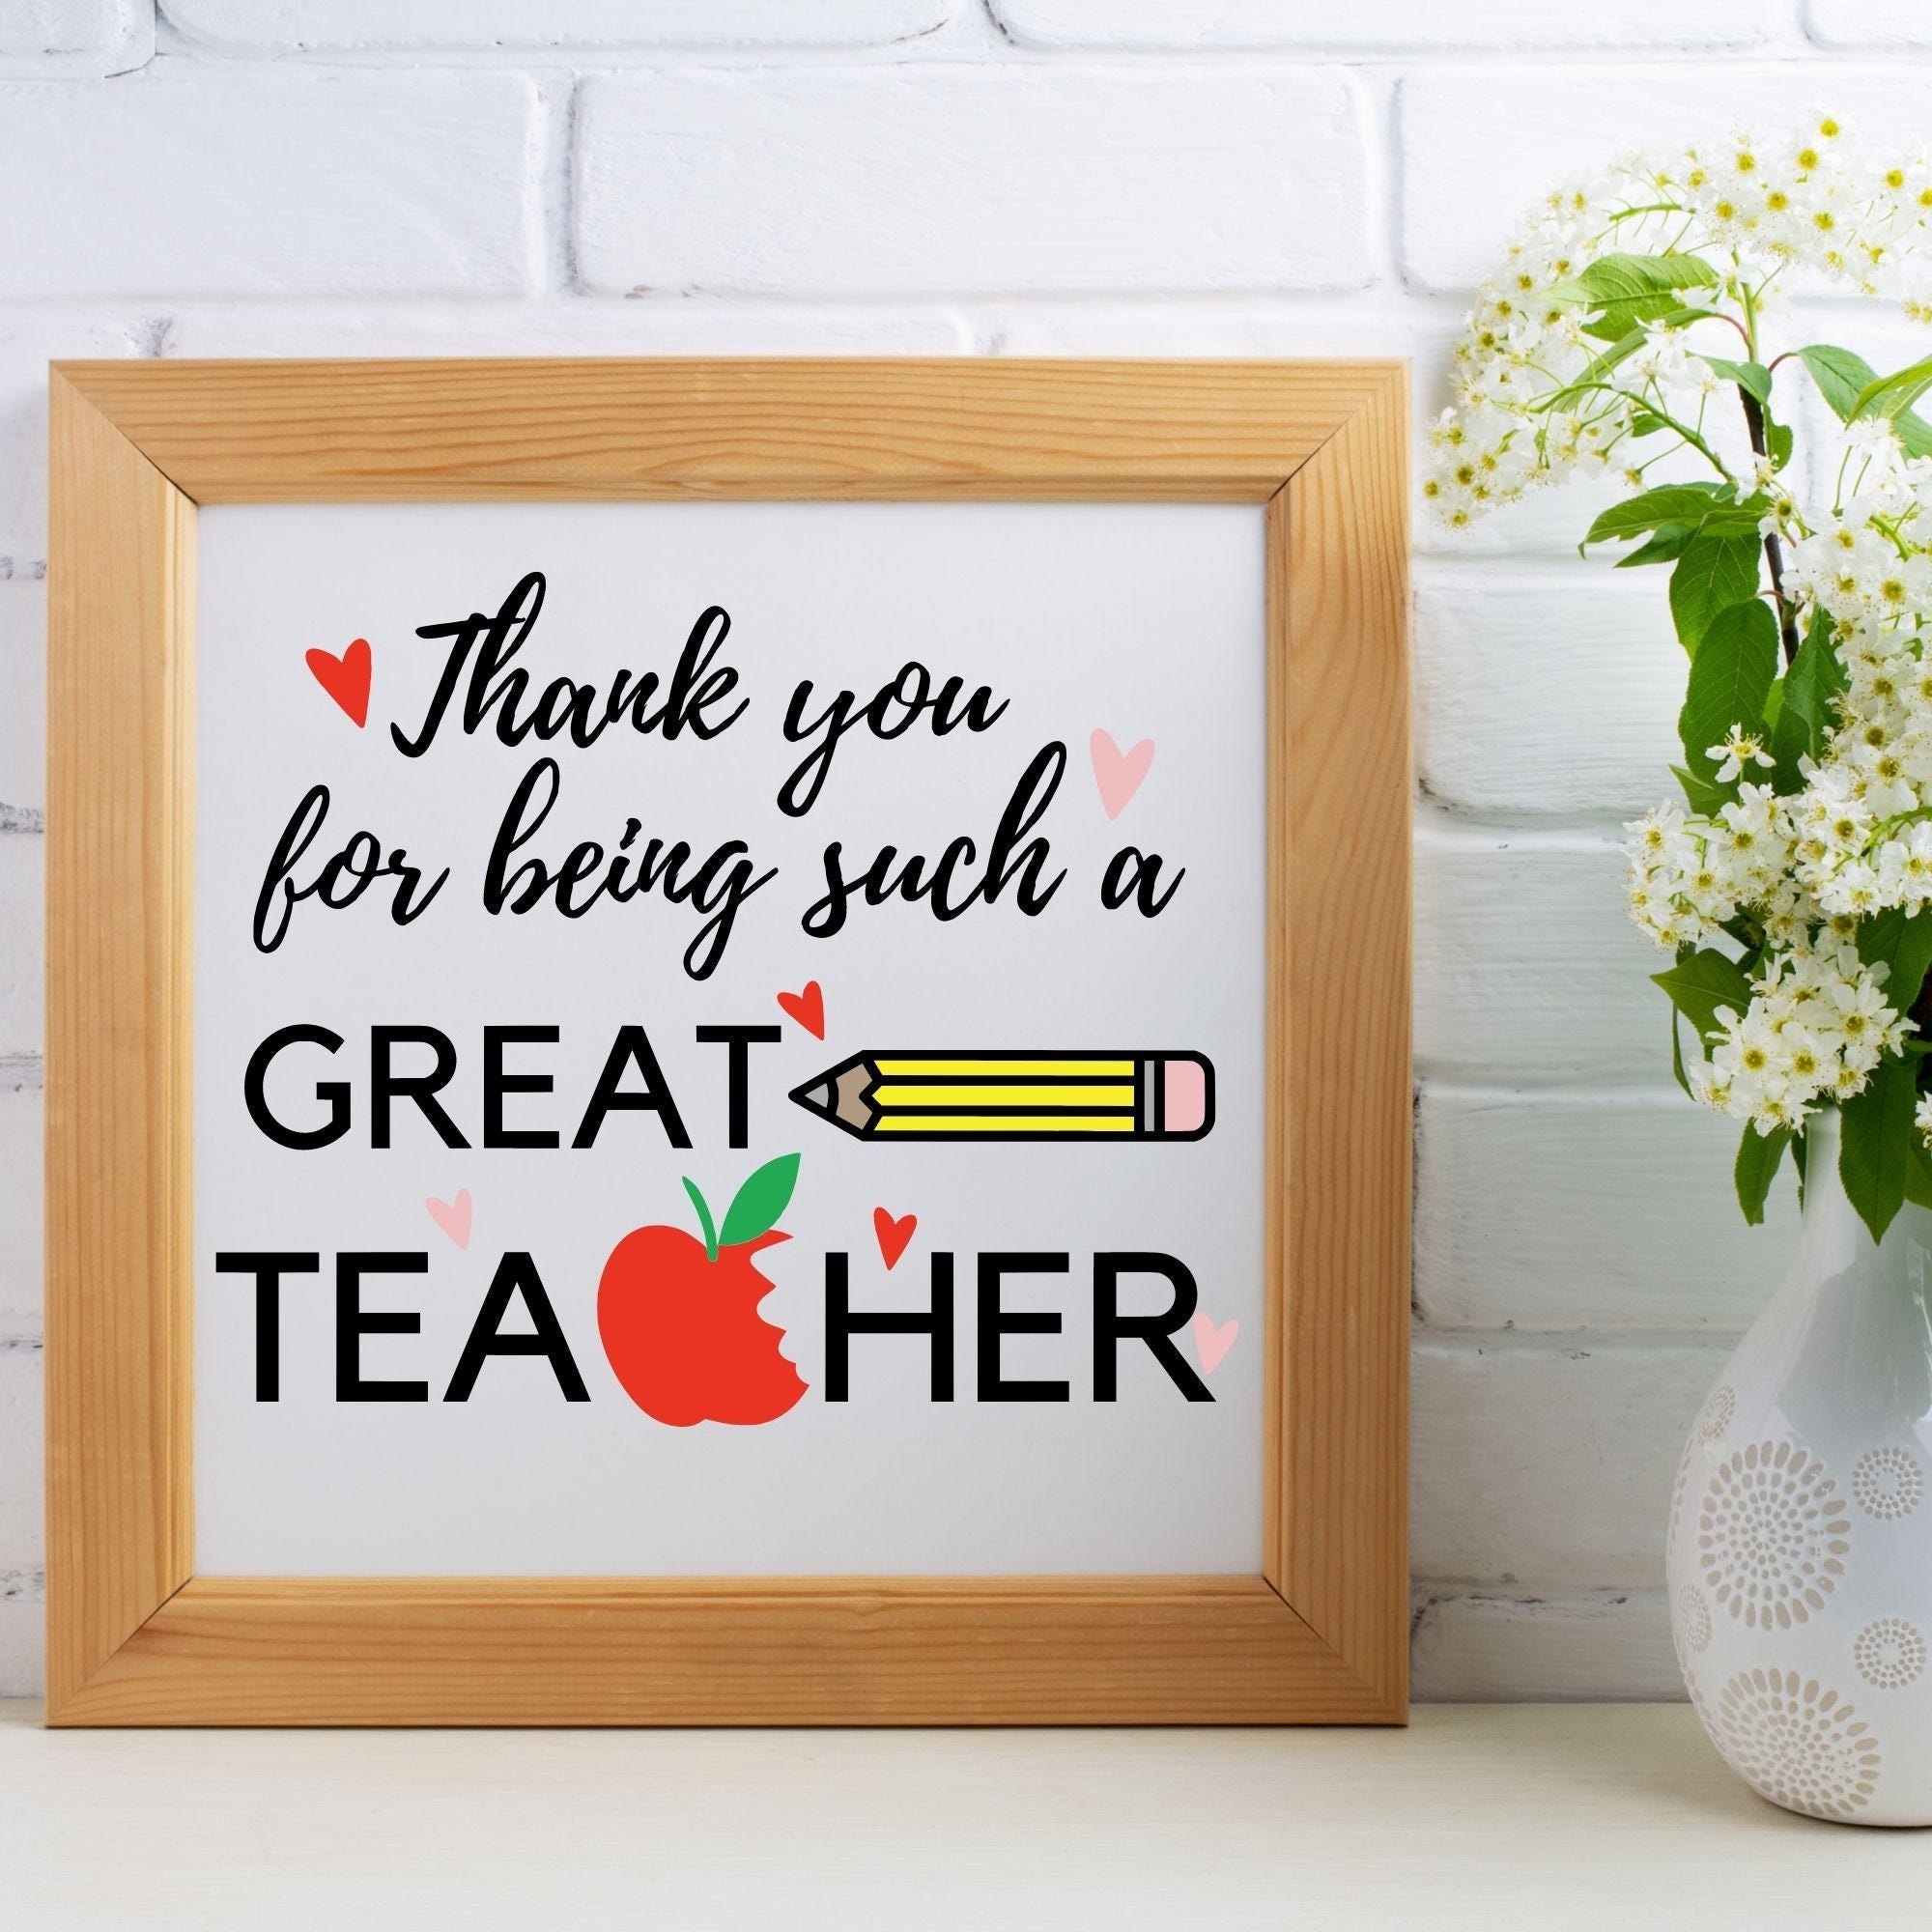 Thank You For Being Such A Great Teacher, PNG, SVG, Instant Download, Digital File, Cut File, Sublimtation, Gift, Appreciation